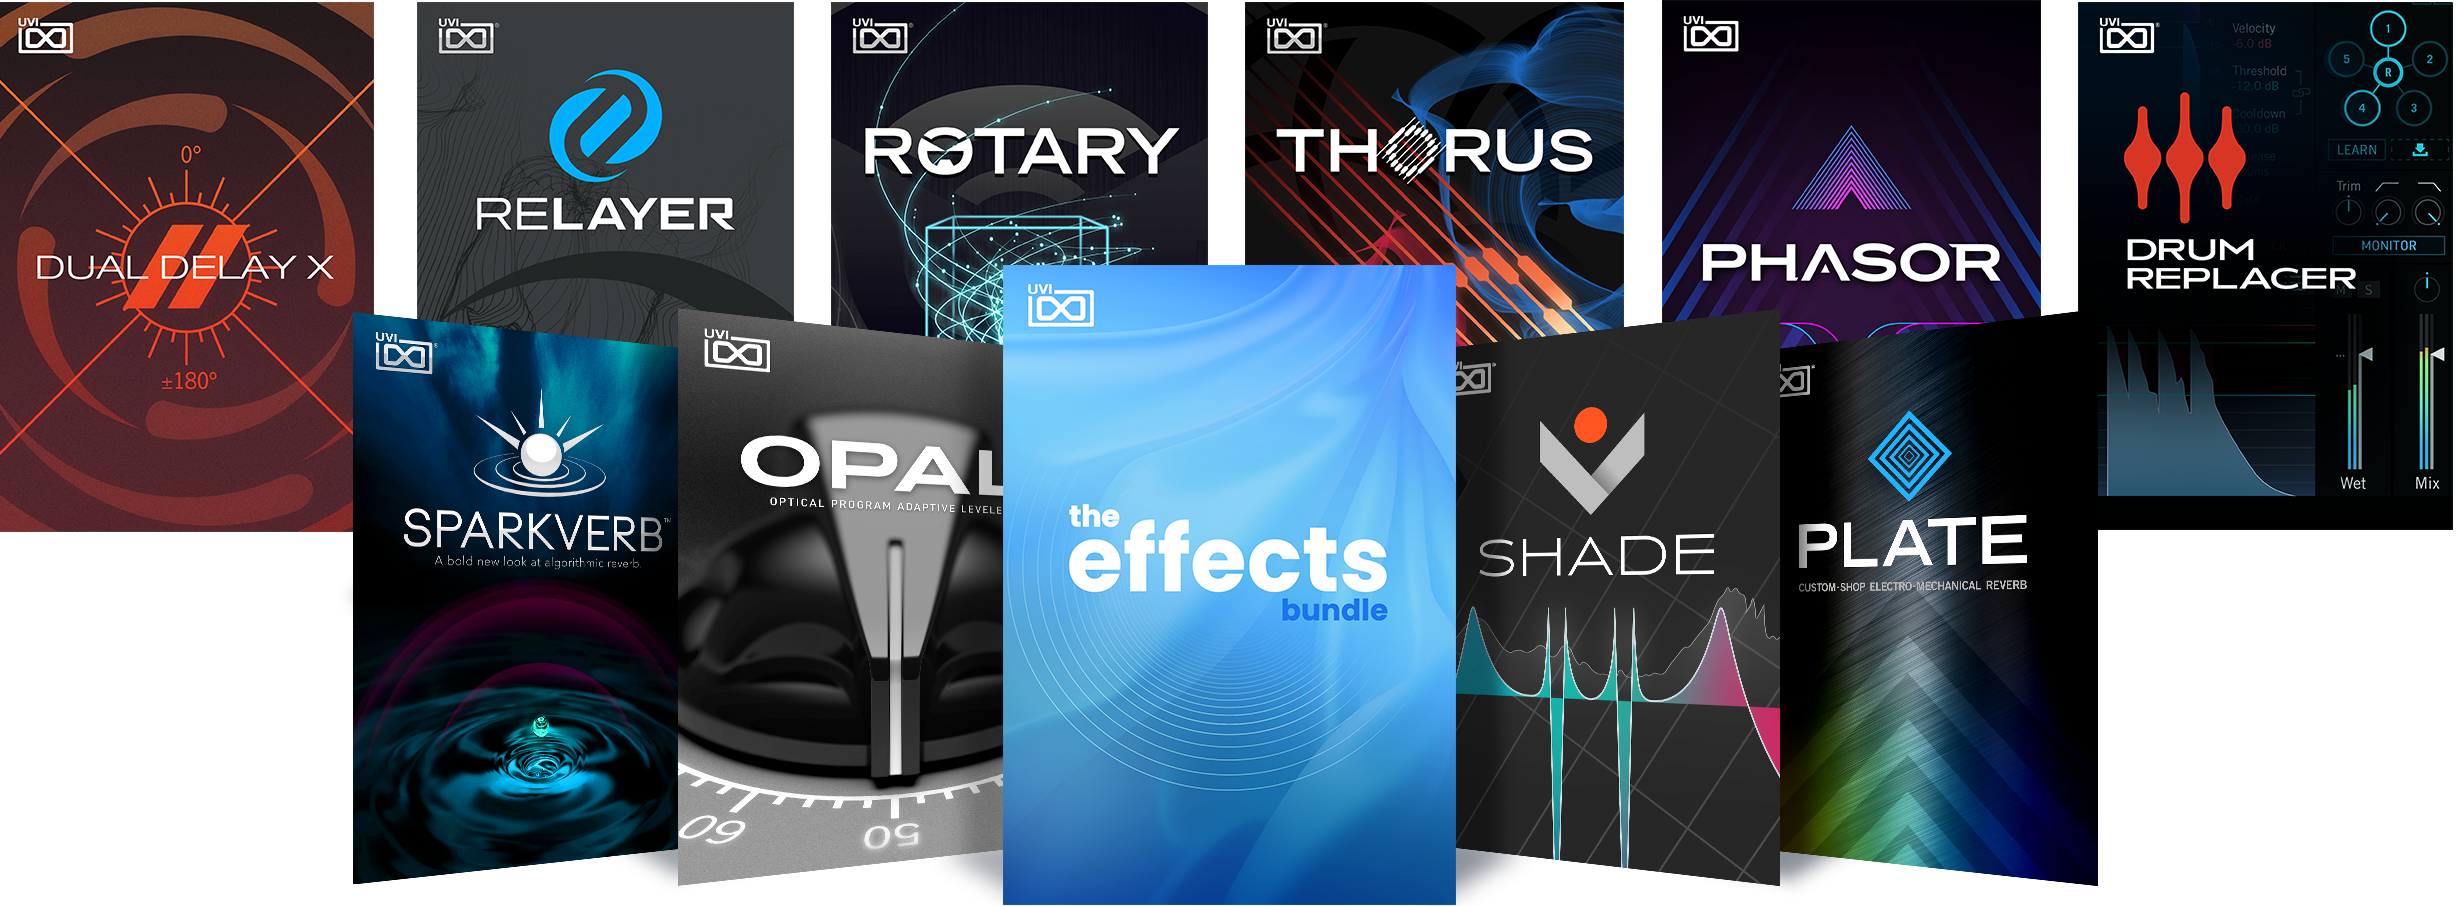 UVI The Effects Bundle | Product covers